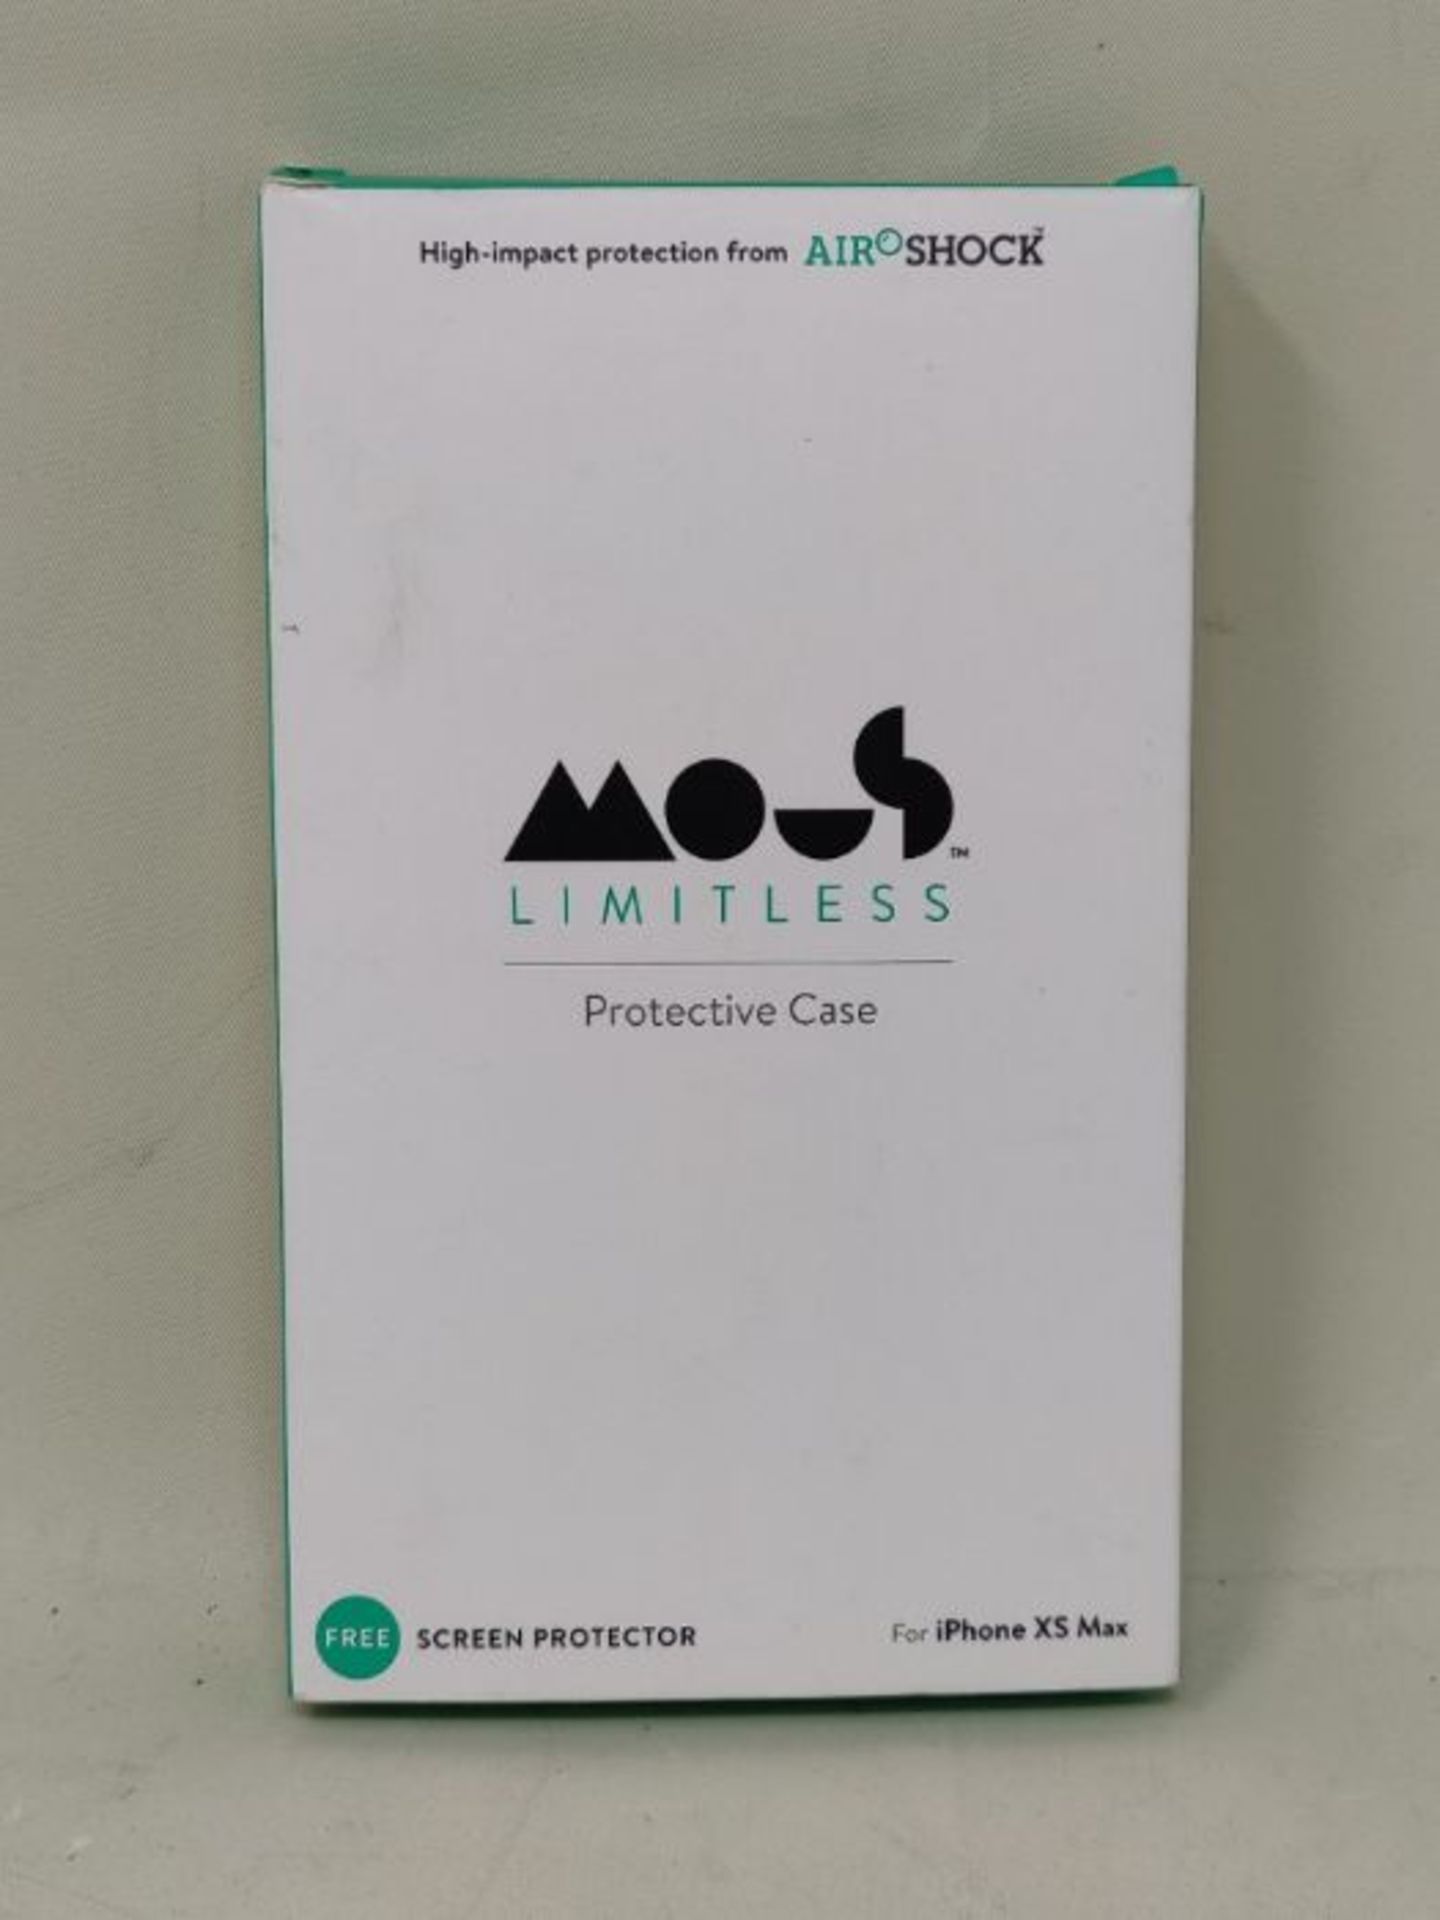 Mous - Protective Case for iPhone XS Max - Limitless 2.0 - Walnut - Screen Protector I - Image 2 of 3